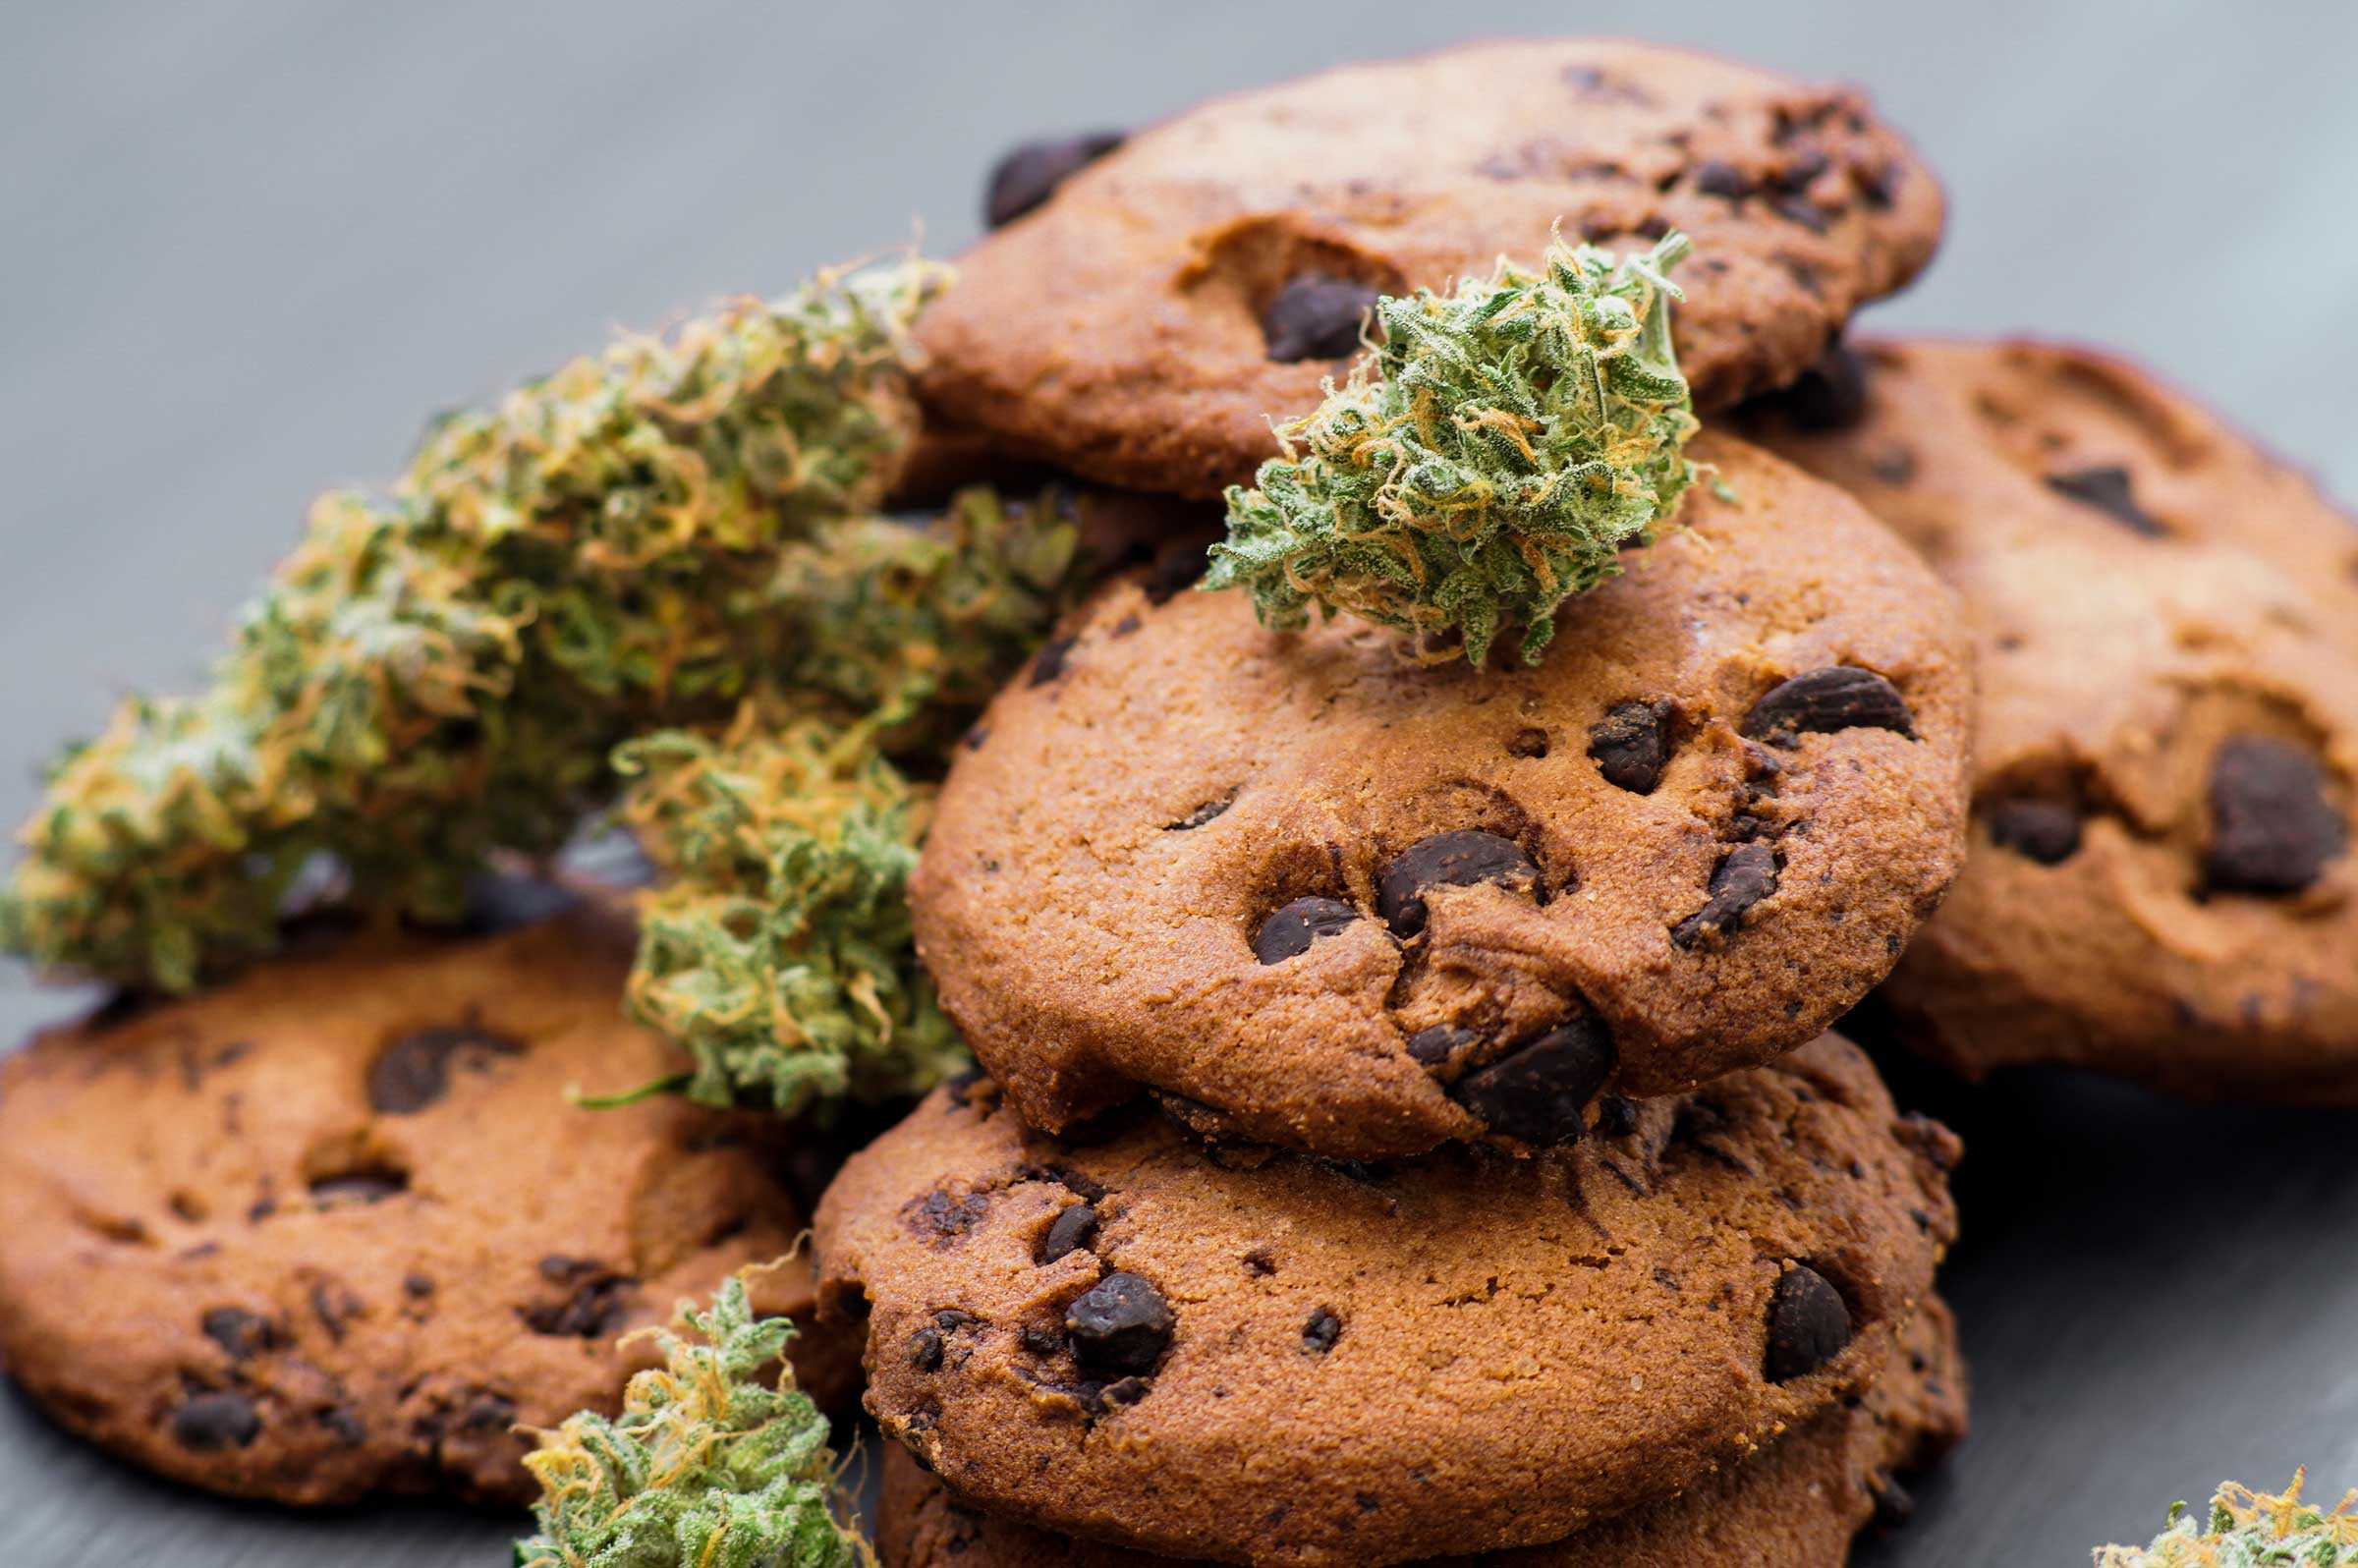 cannabis flower on top of chocolate chip cookies